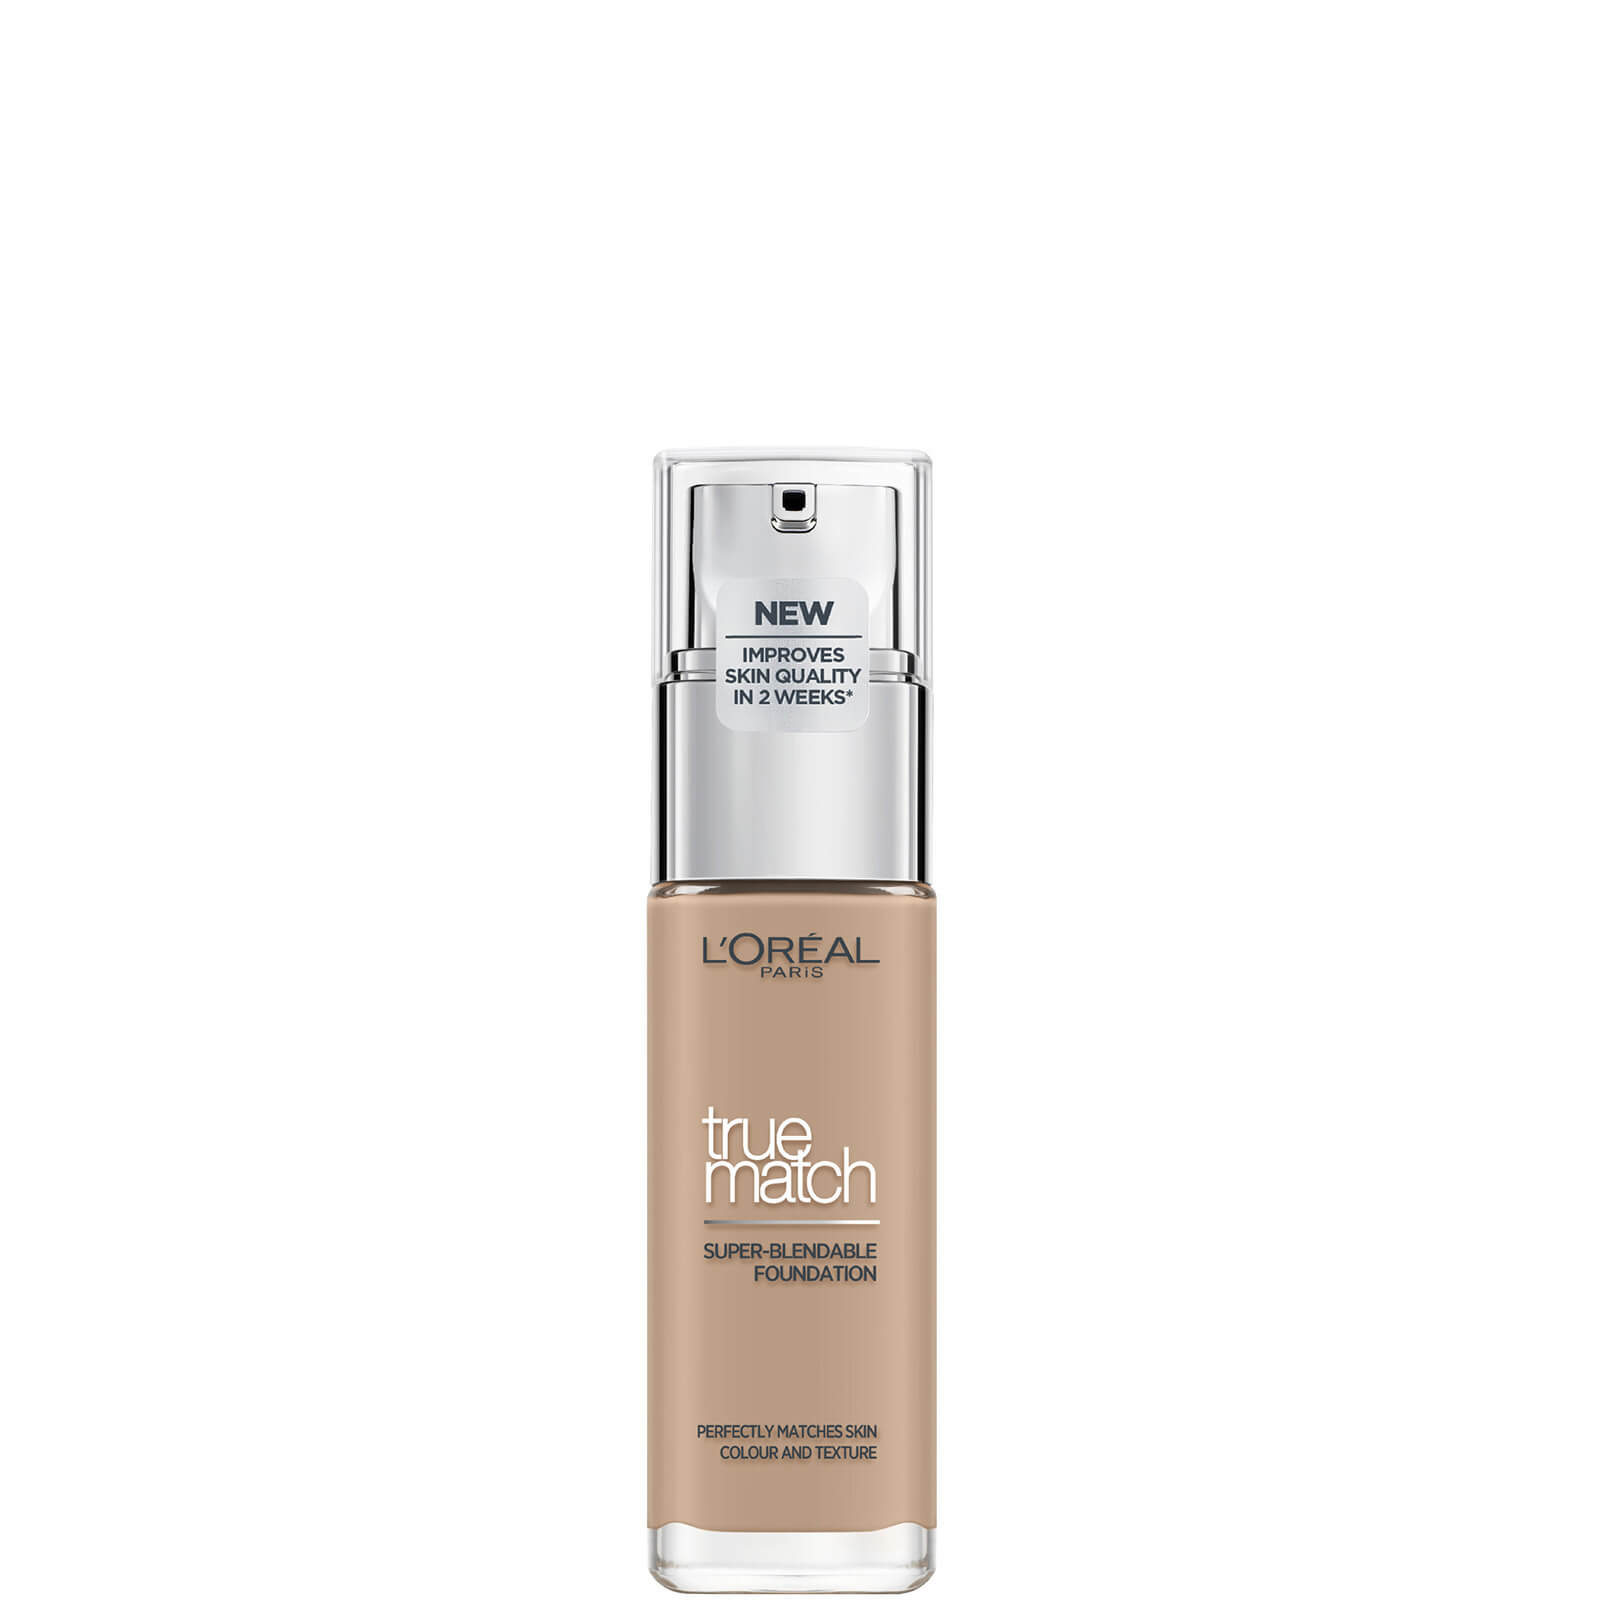 L'Oréal Paris True Match Liquid Foundation with SPF and Hyaluronic Acid 30ml (Various Shades) - 25 Beige